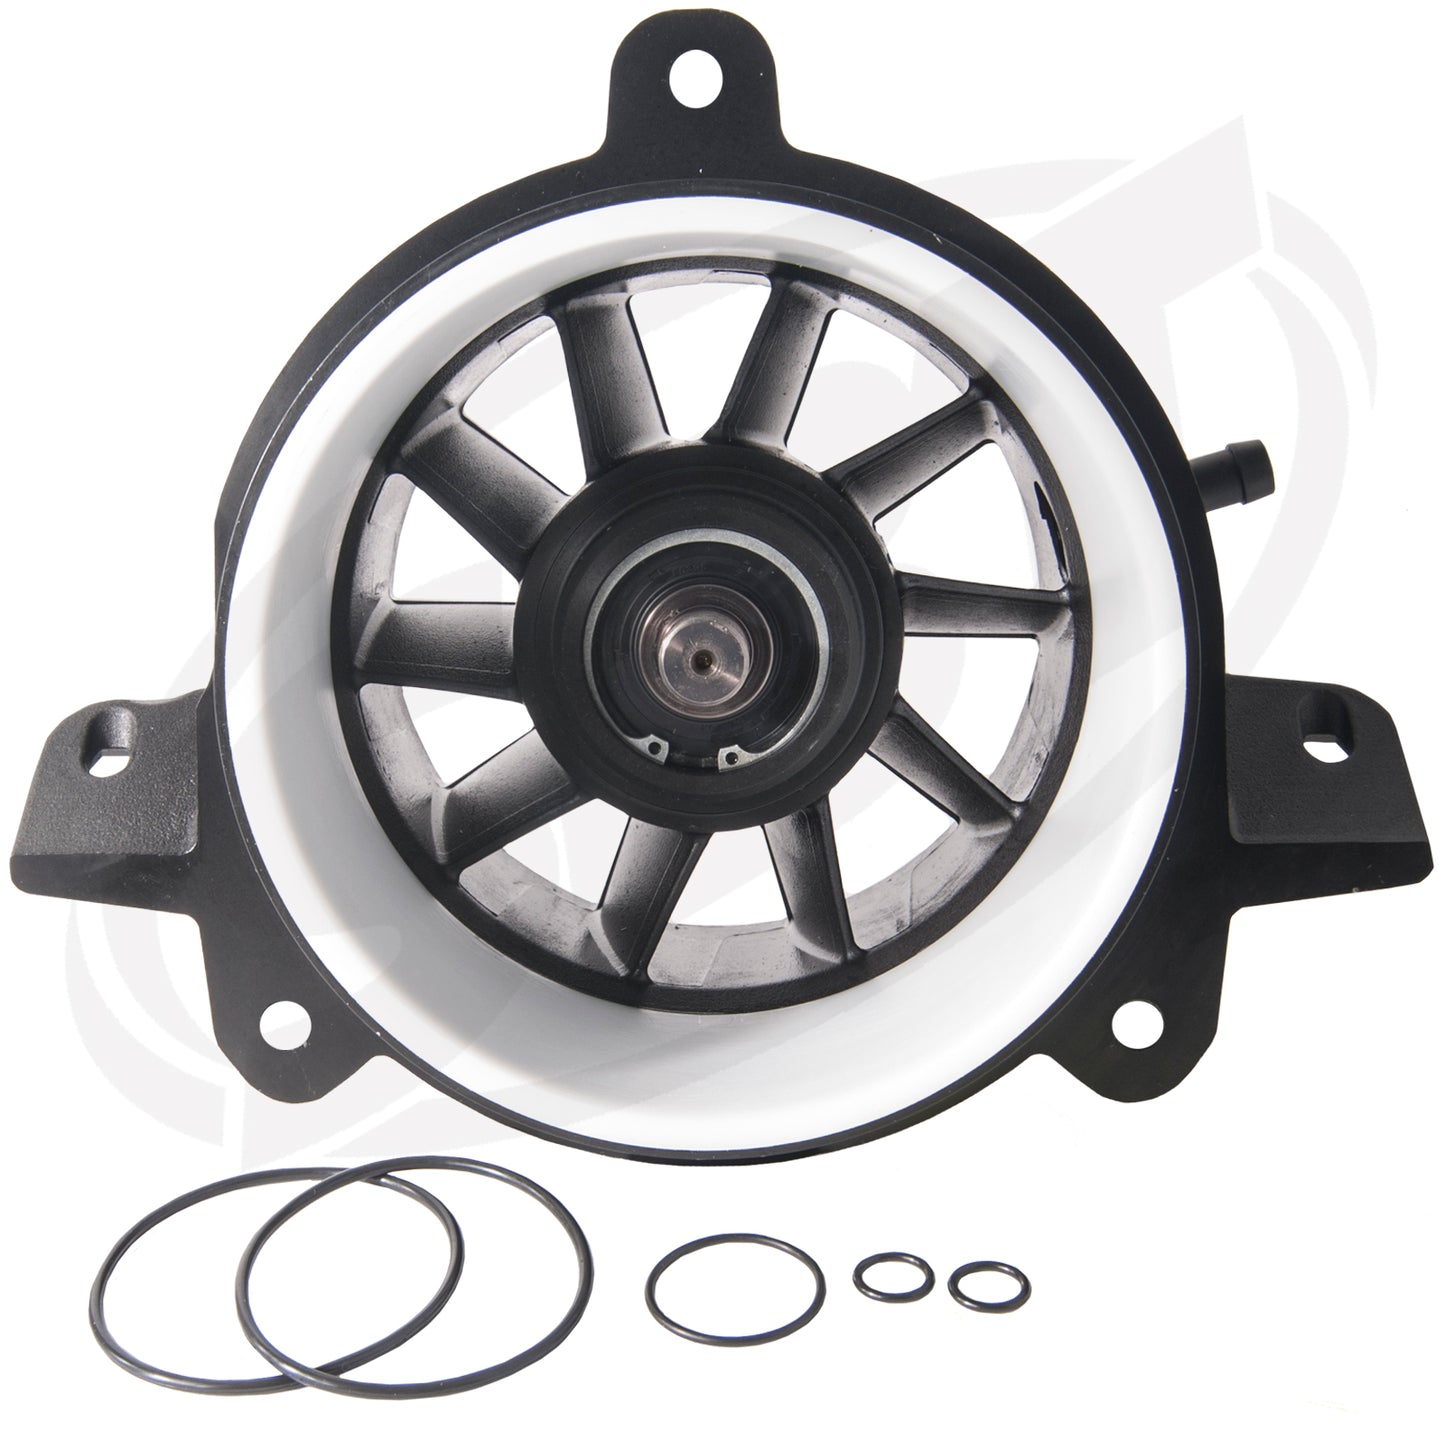 SBT Sea-Doo 4 Stroke Jet Pump Assembly for Sea-Doo with 155mm GTX 2010 2011